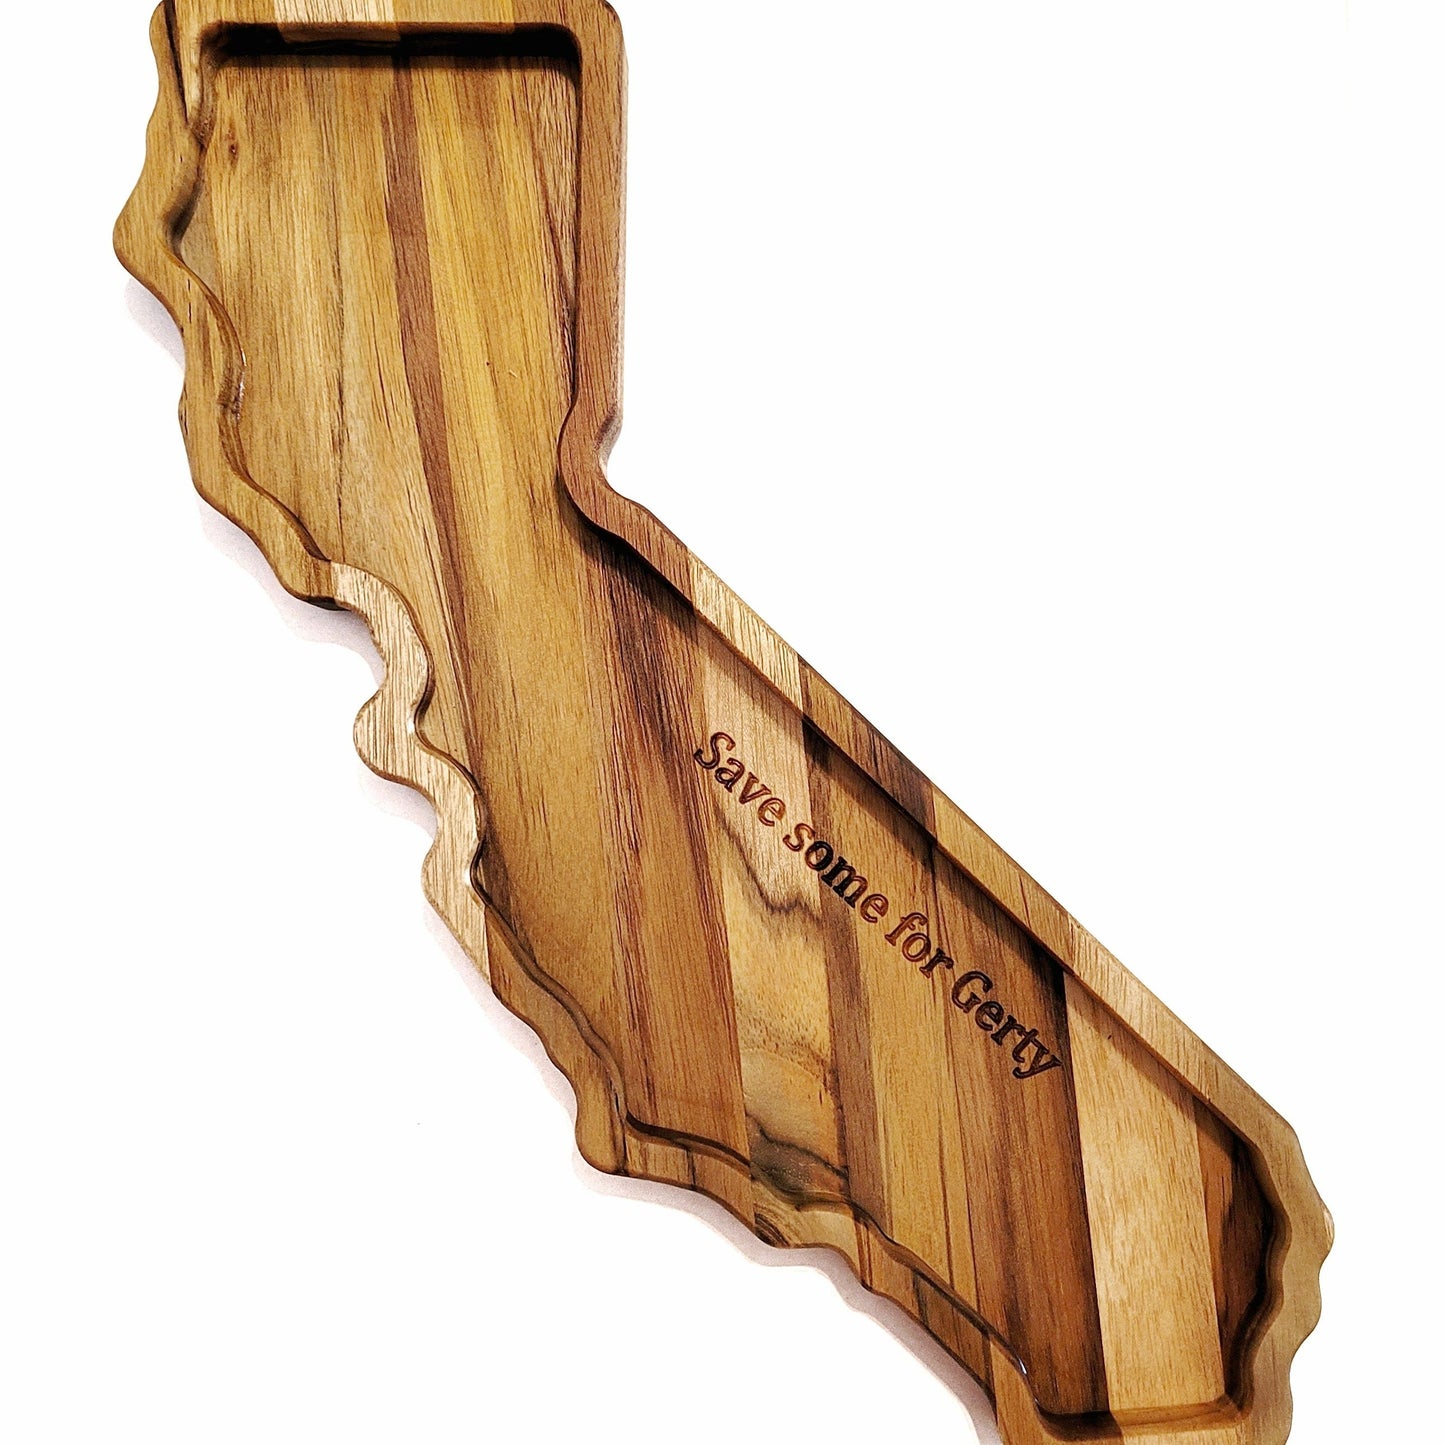 California shaped wooden charcuterie board, a conversation starter for your next gathering